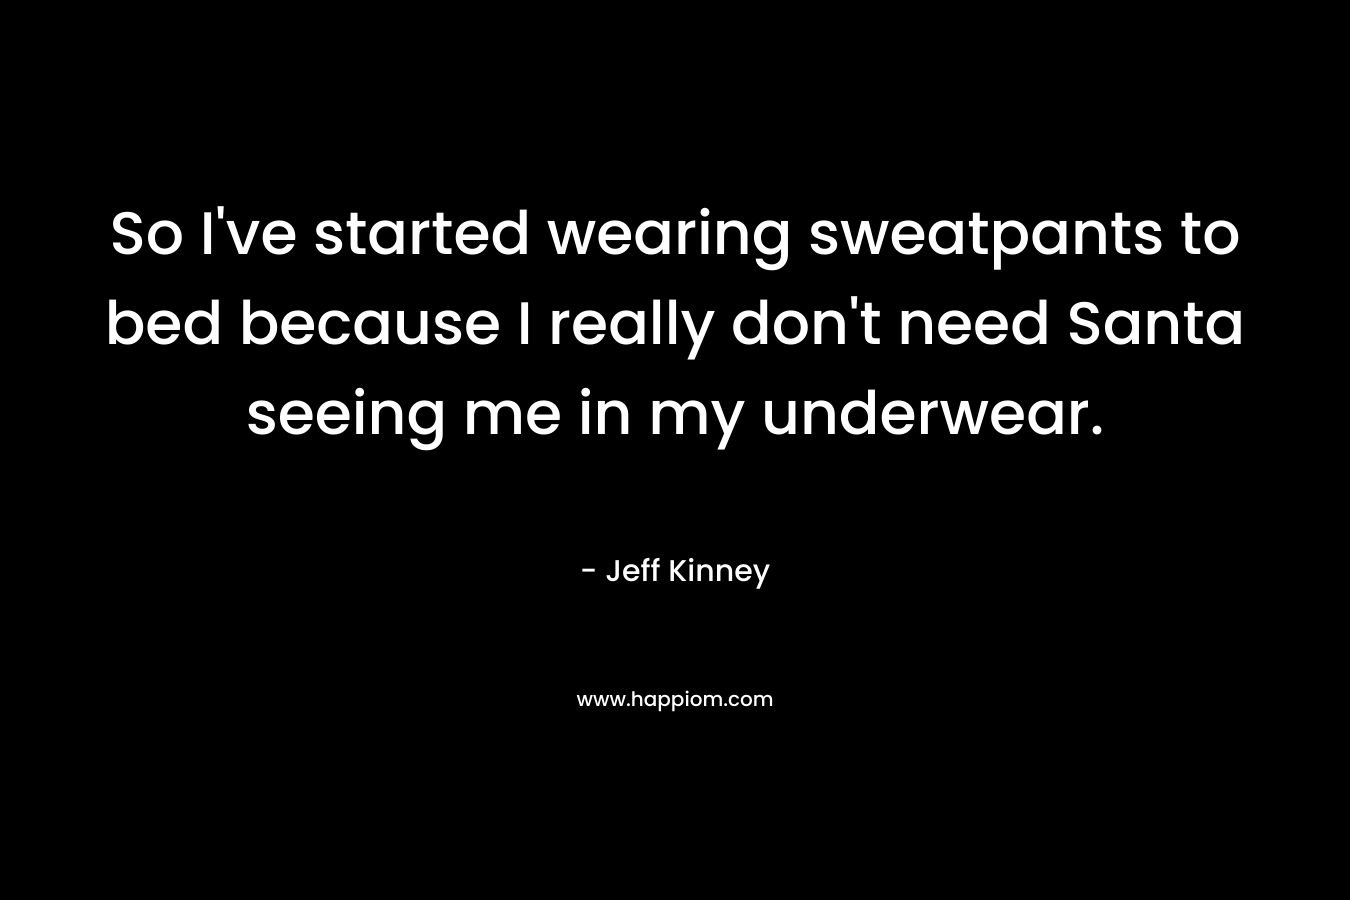 So I've started wearing sweatpants to bed because I really don't need Santa seeing me in my underwear.